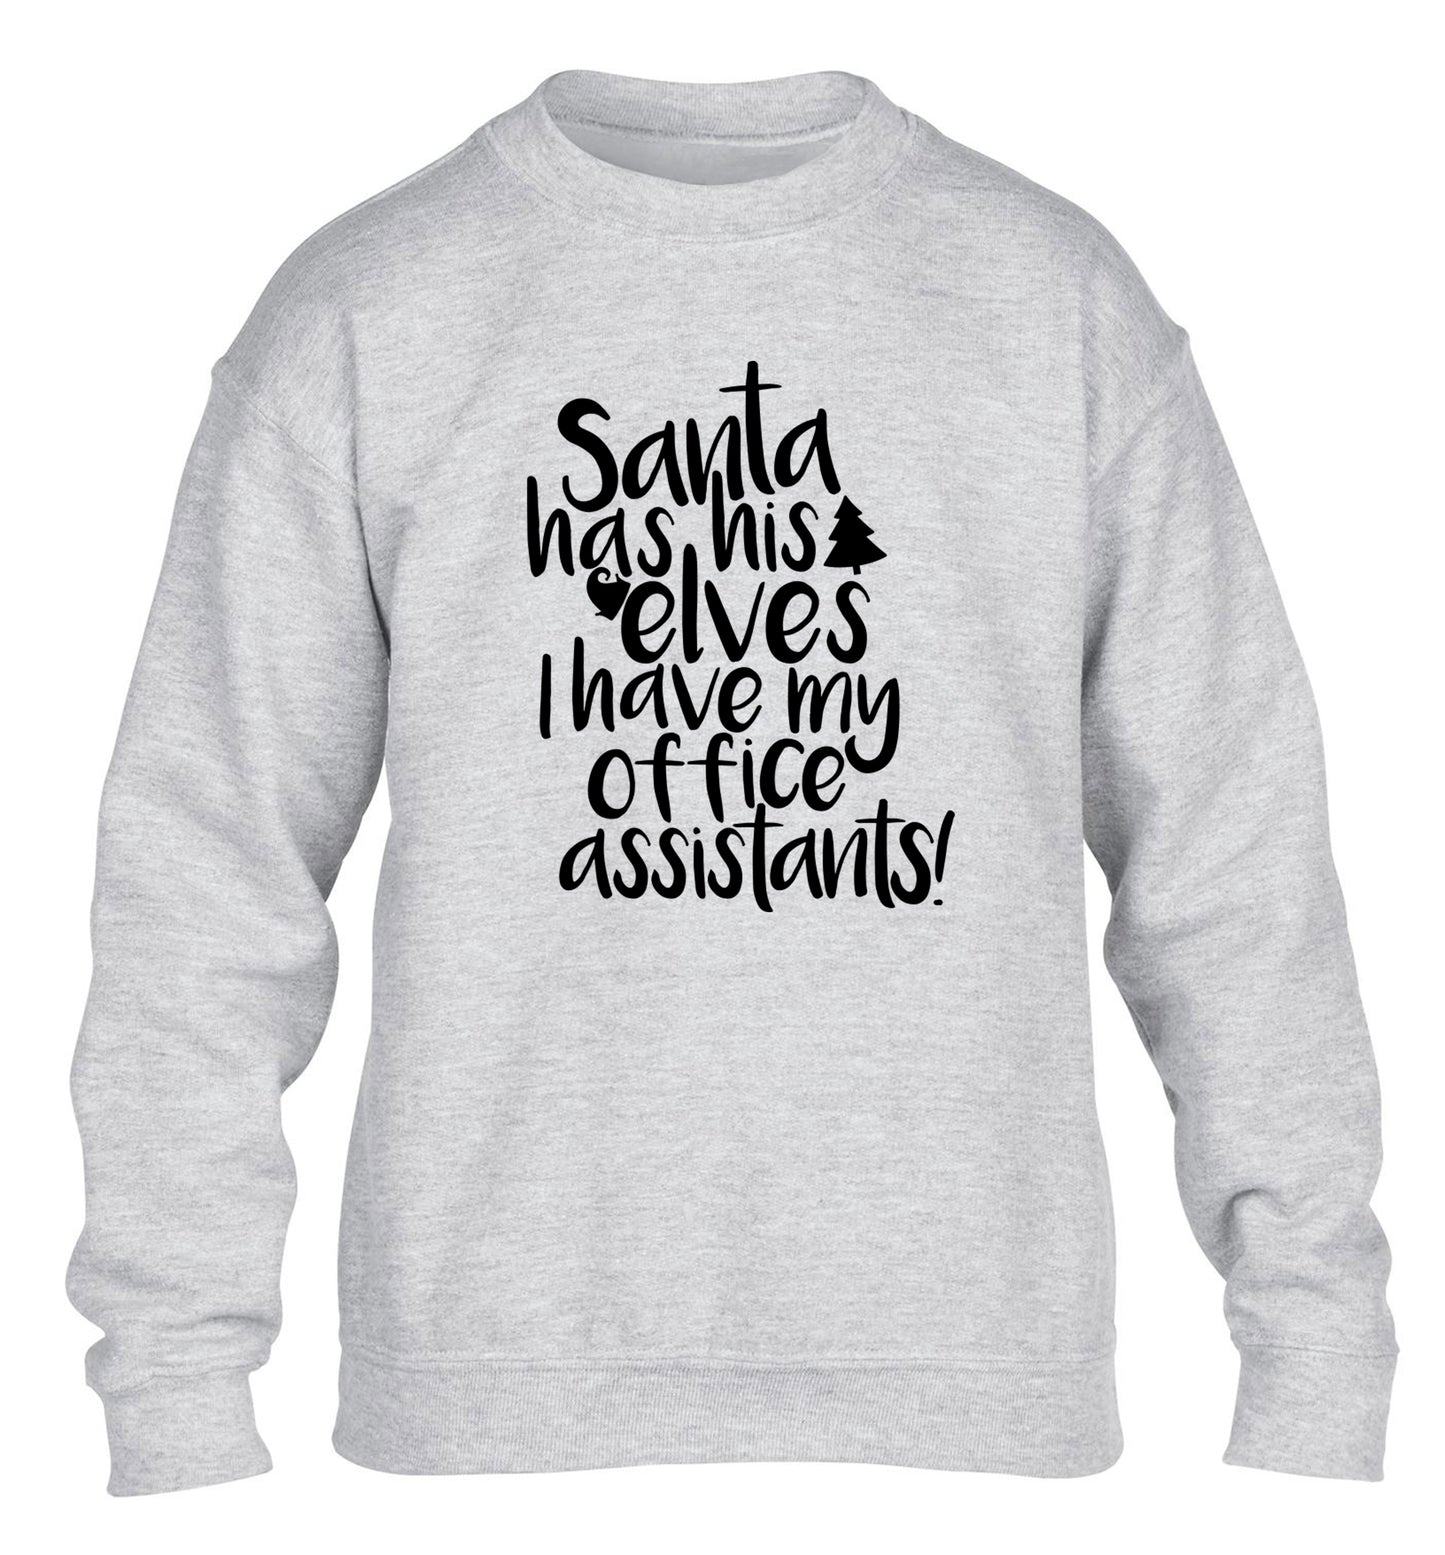 Santa has his elves I have my office assistants children's grey sweater 12-14 Years